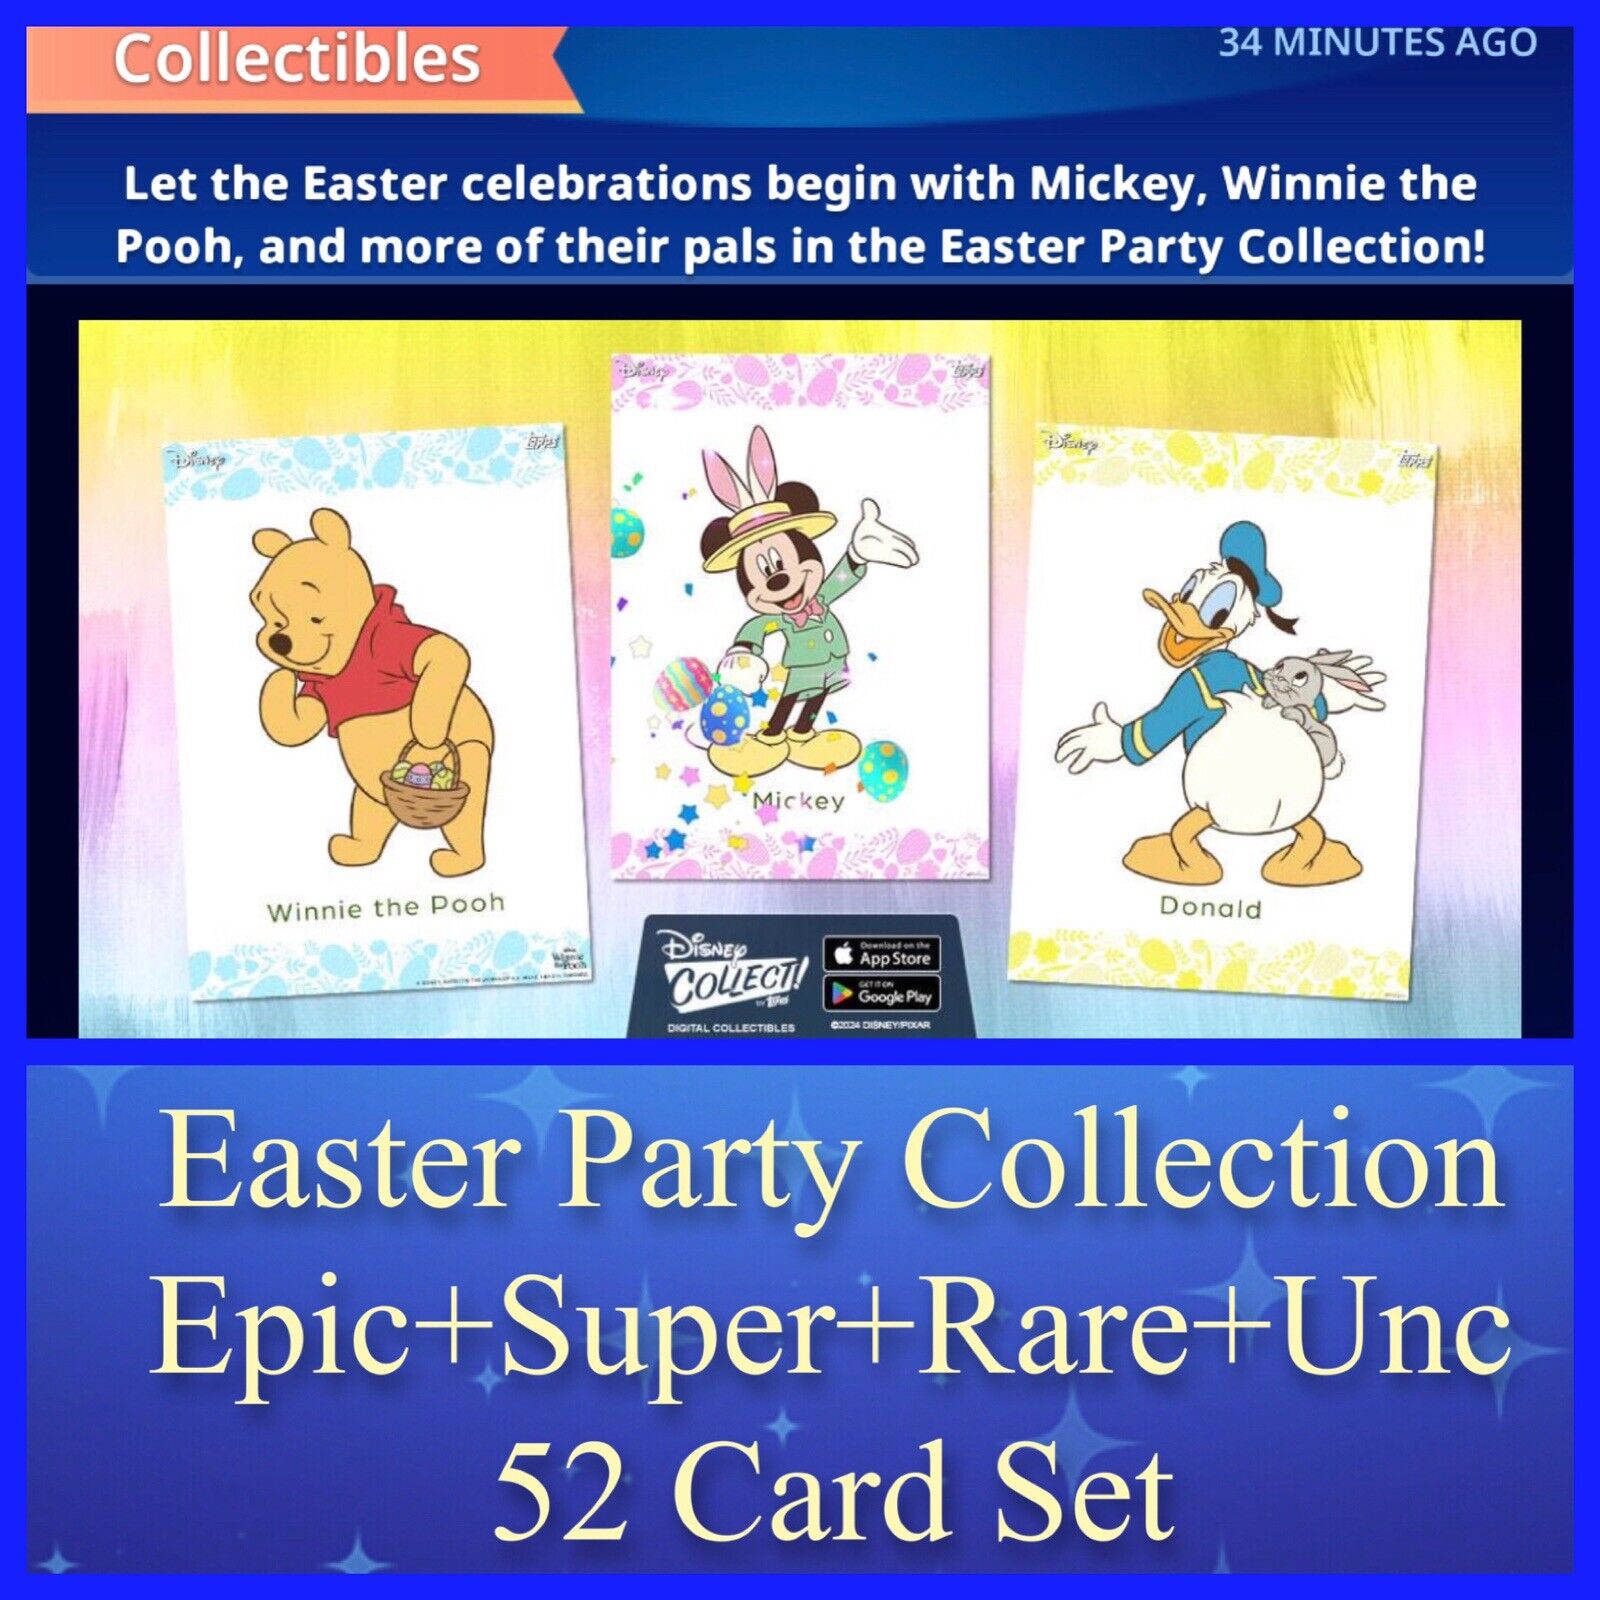 EASTER PARTY COLLECTION-EPIC+SR+RARE+UNC 52 CARD SET-TOPPS DISNEY COLLECT